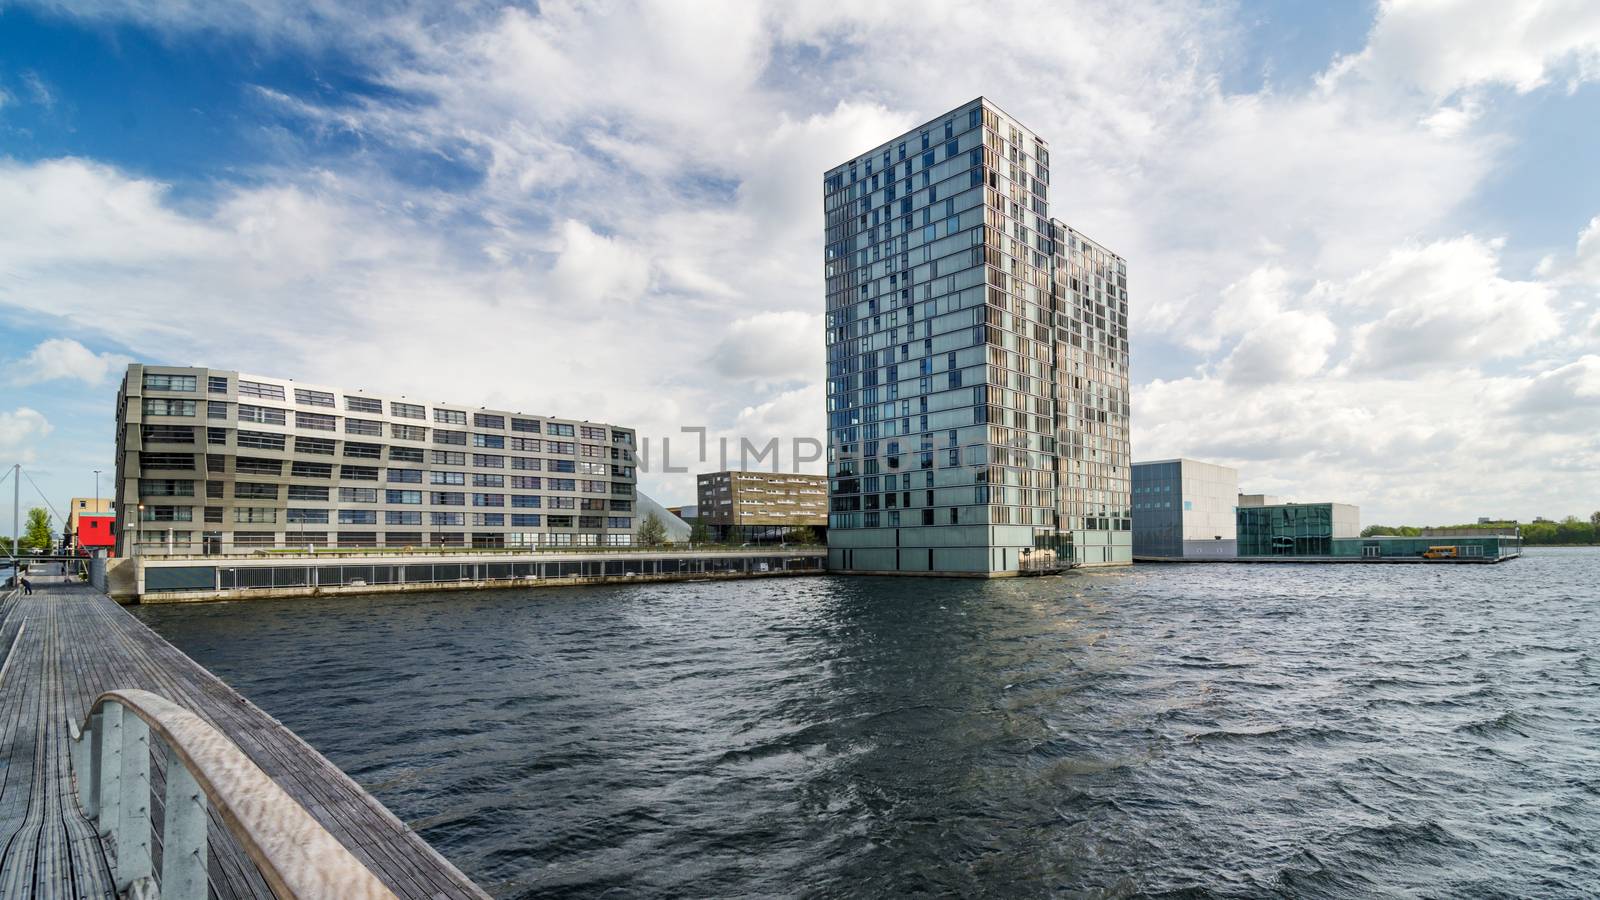 Skyline modern buildings of Almere Stad by siraanamwong